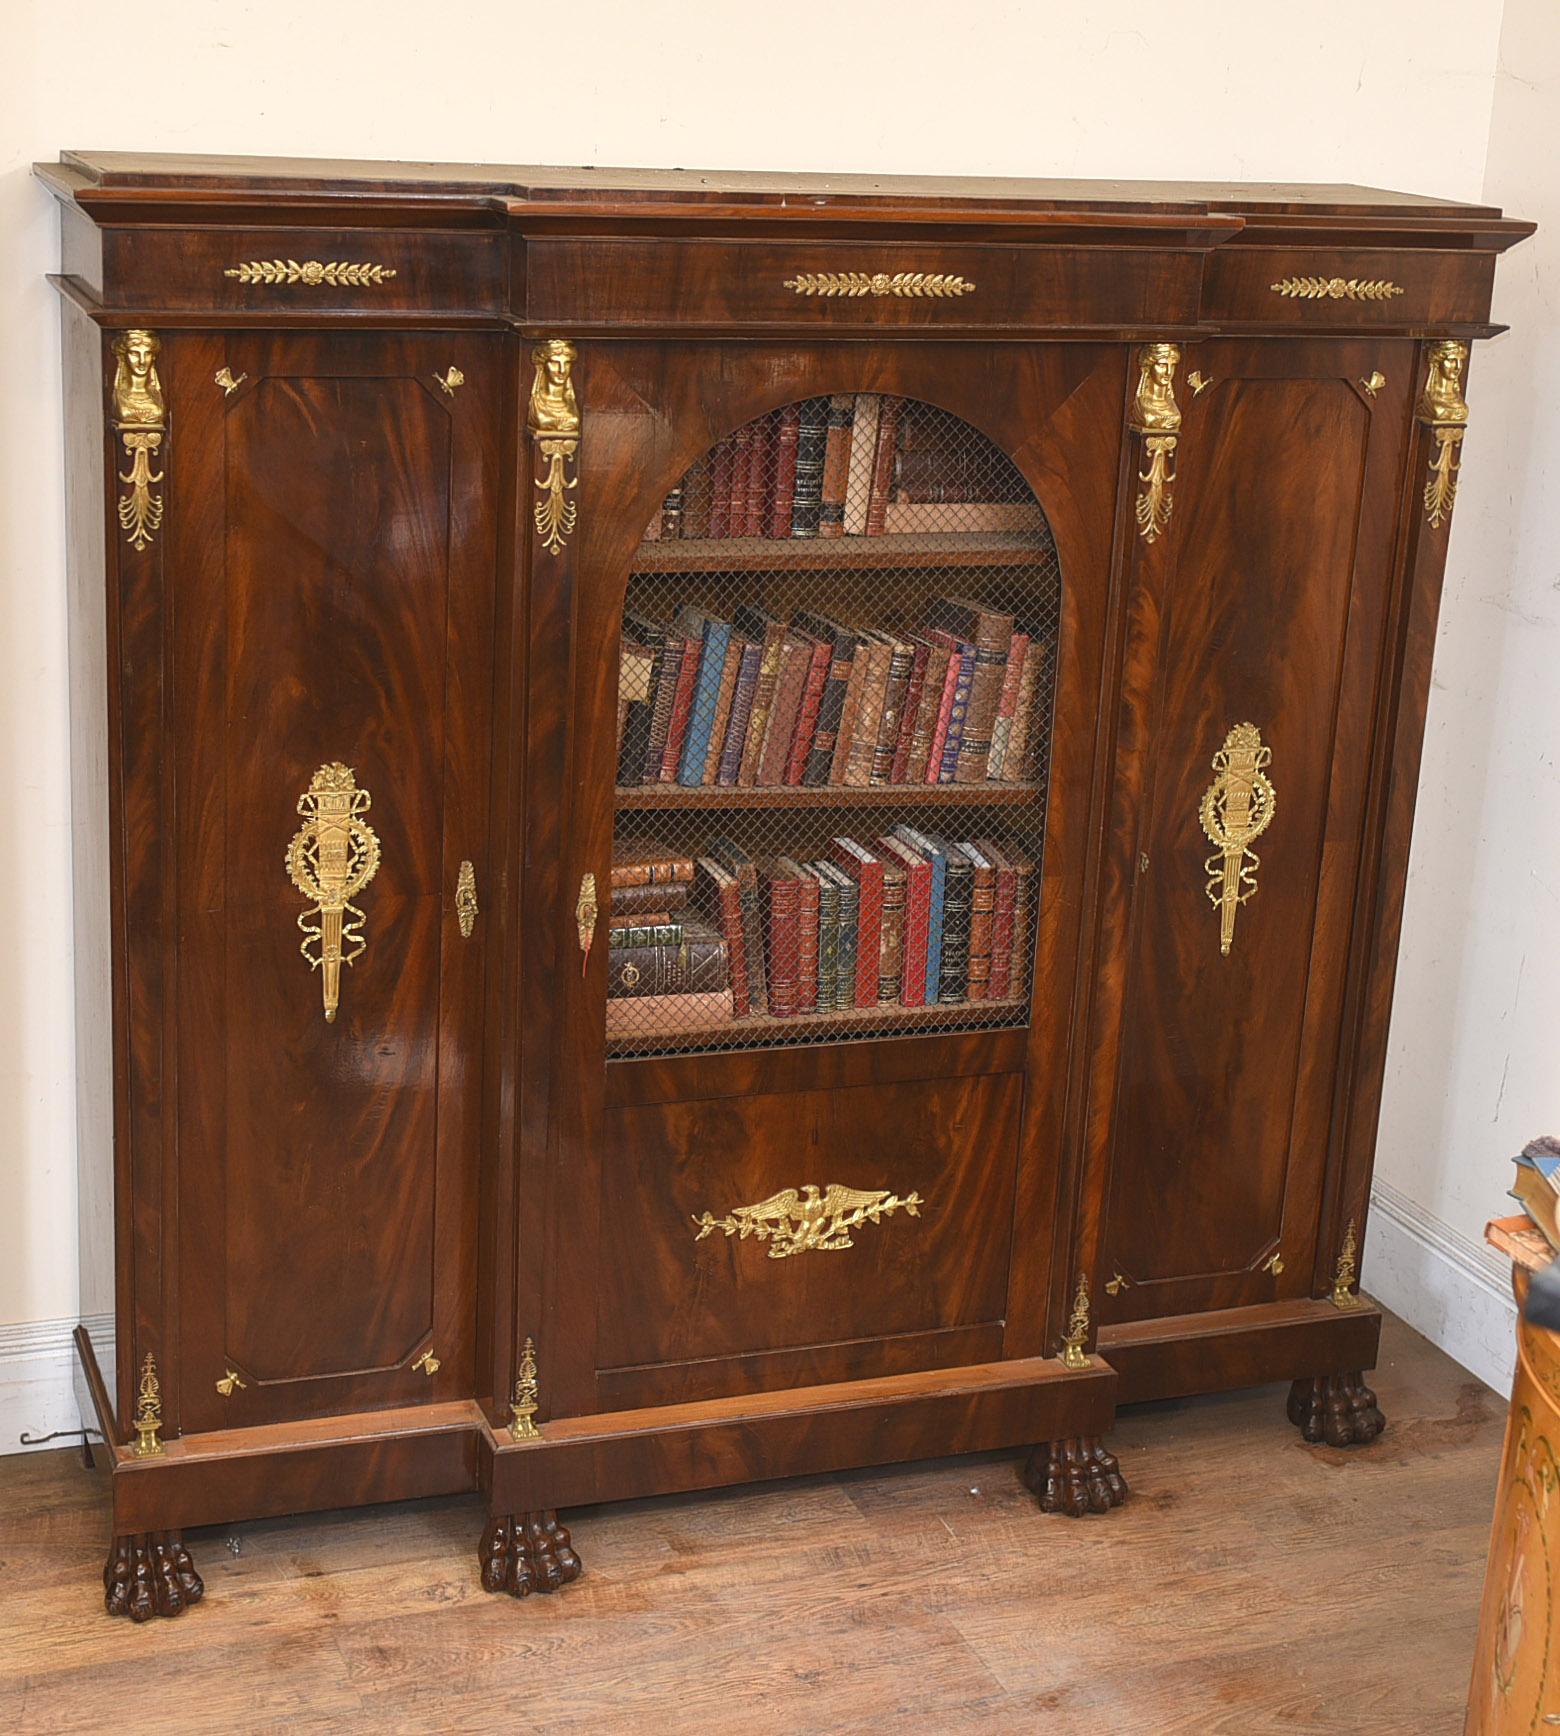 - Gorgeous French Empire antique bookcase or cabinet in flame mahogany
- Hopefully the photos do this stunning piece some justice
- It's ant antique and we date it to circa 1880
- Ormolu fixtures are orginal and in great shape, including pharo